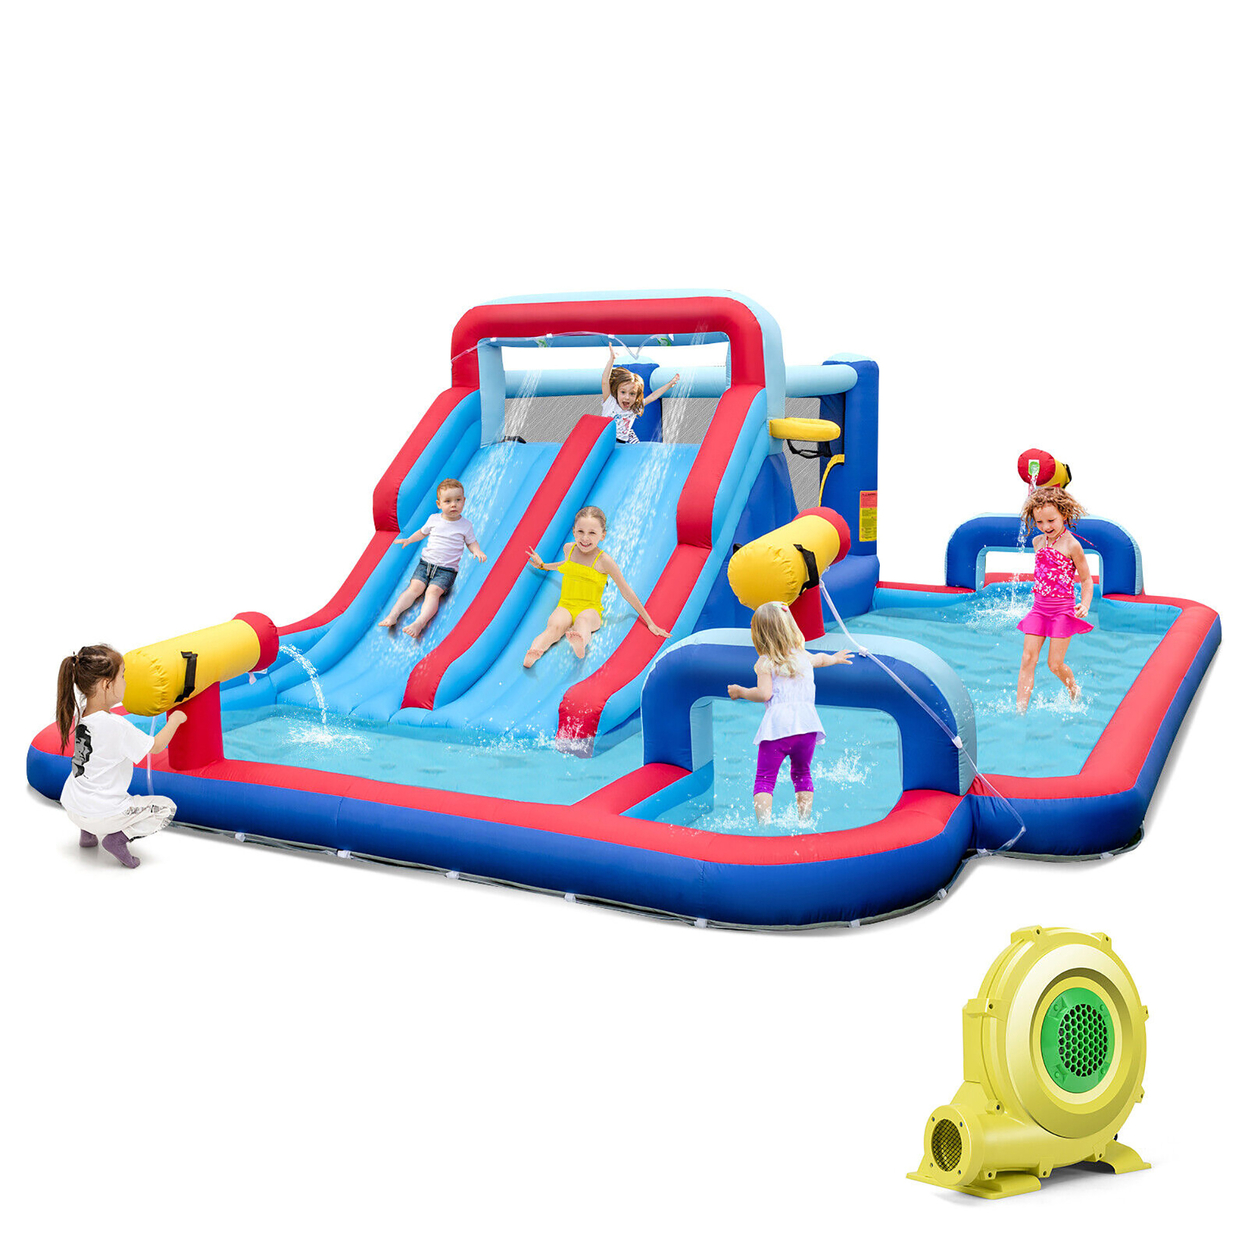 Inflatable Water Slide Park Kids Bounce House Climbing Jumping With 950W Blower